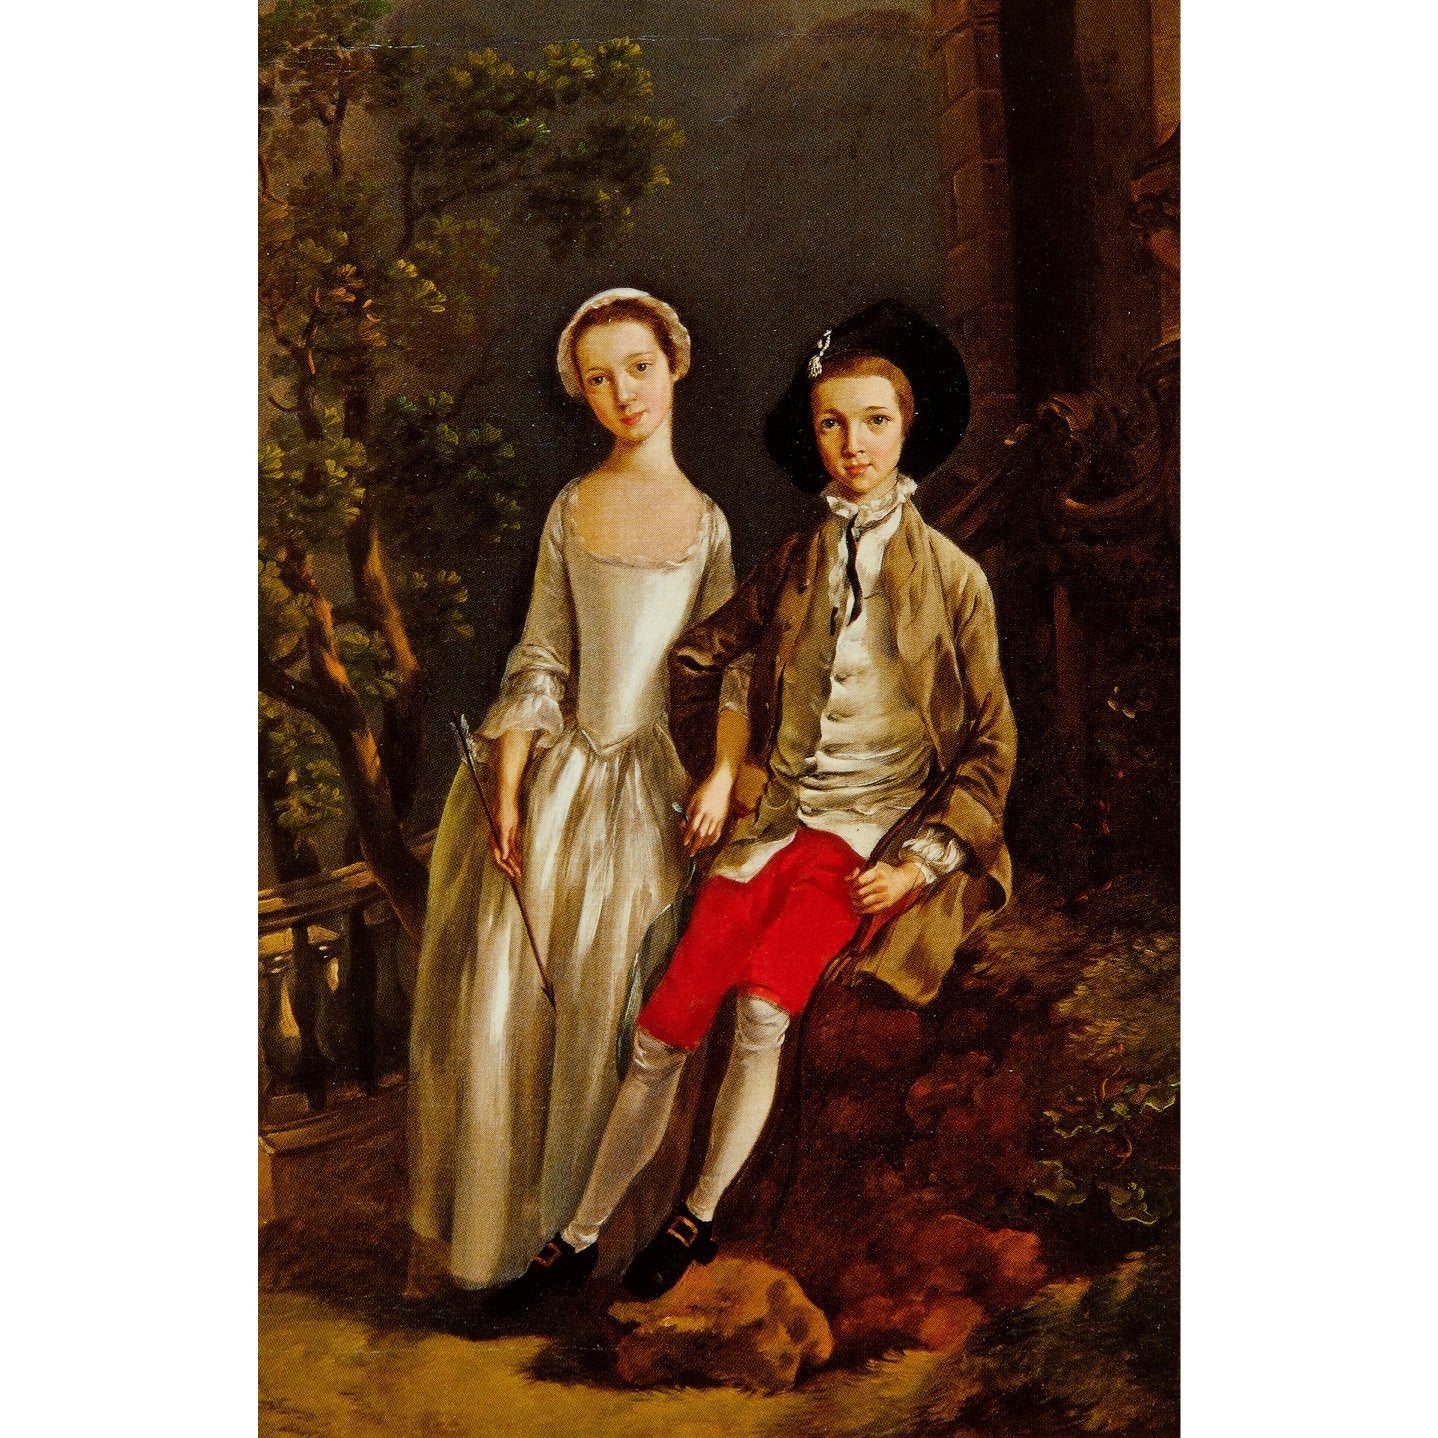 Notecard - Heneage Lloyd and his Sister by Thomas Gainsborough. From the Fitzwilliam Museum, brought to you by CuratingCambridge.co.uk